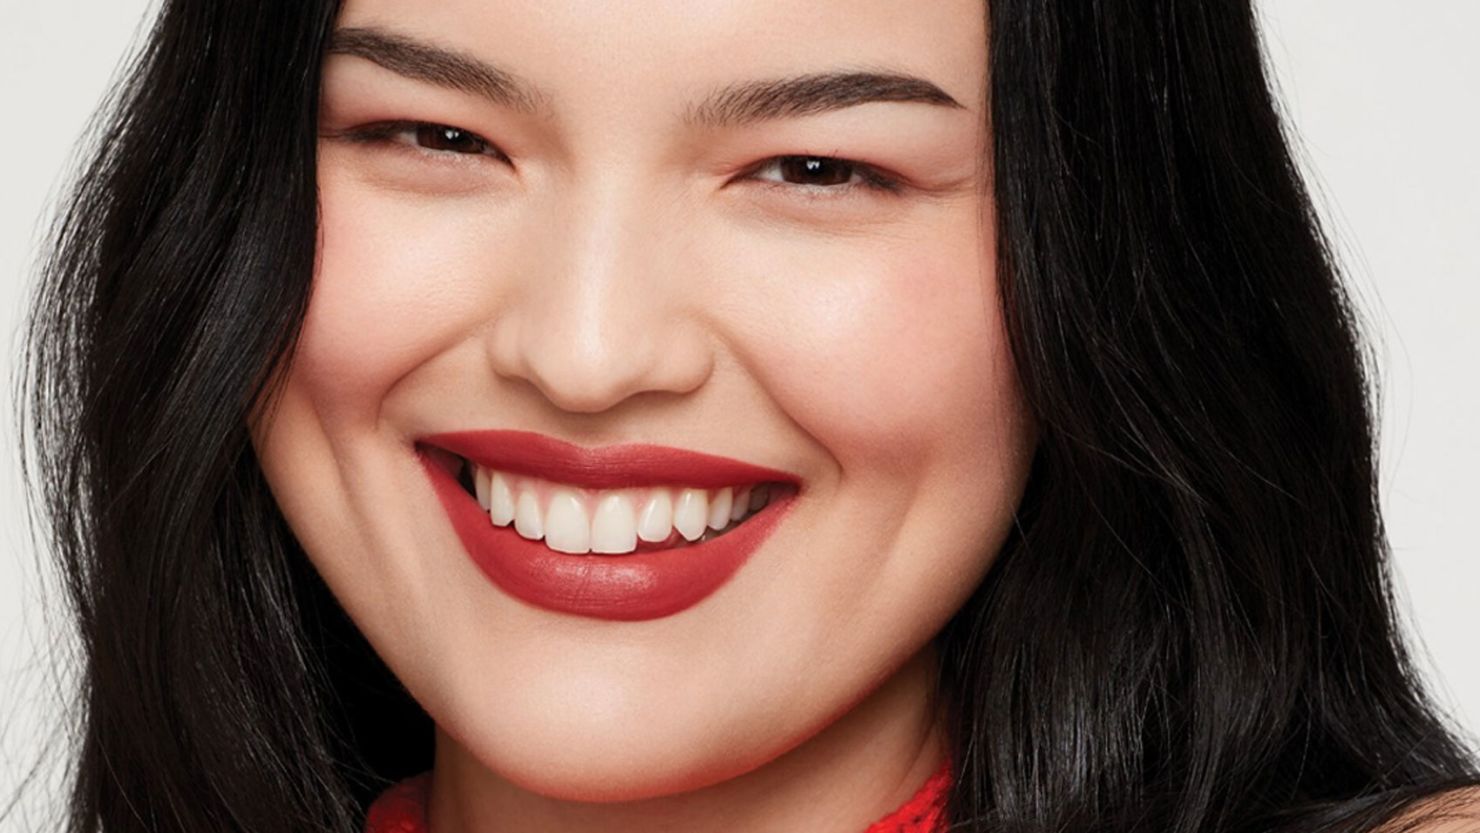 Meet Hot Mama: Your New Favorite Red Lipstick by The Lip Bar